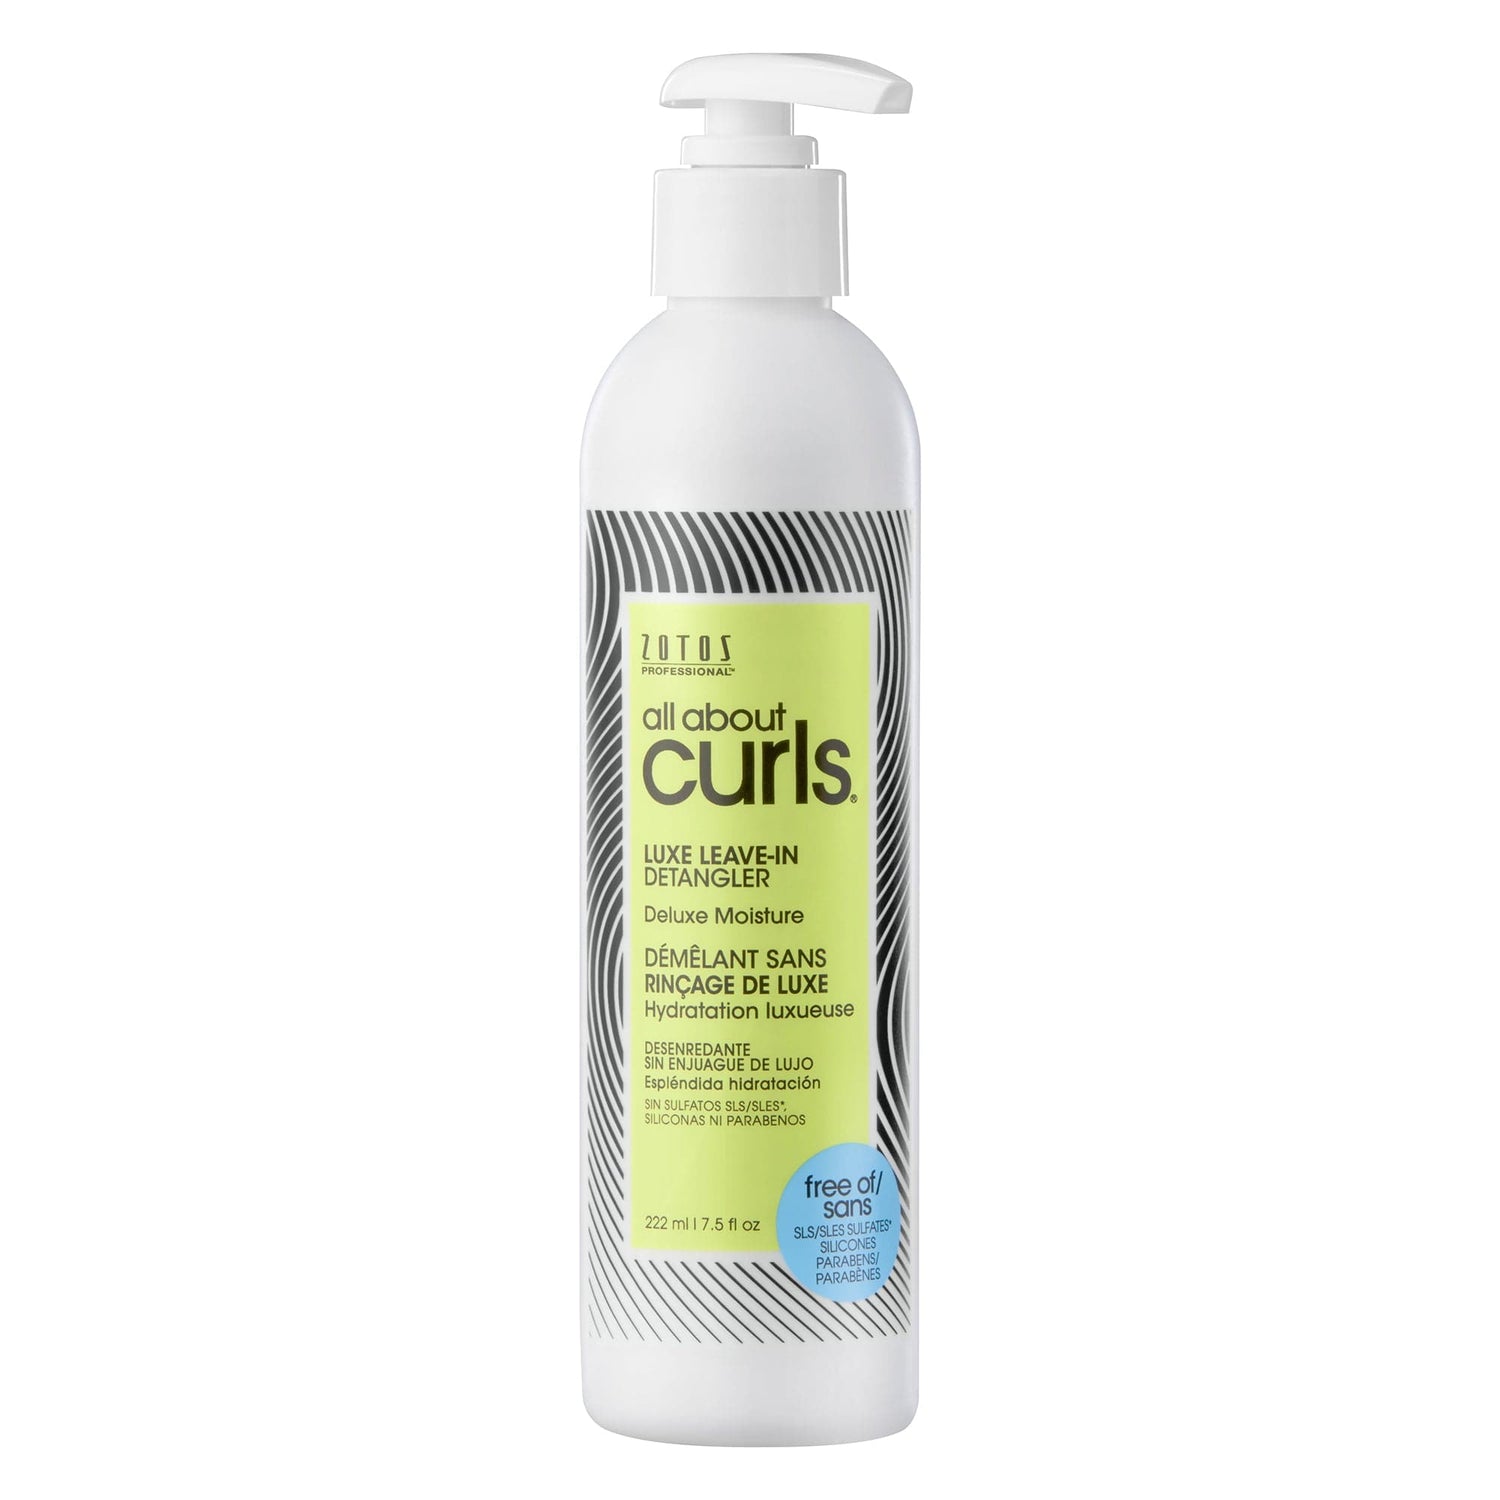 All About Curls® Luxe Leave-In Detangler